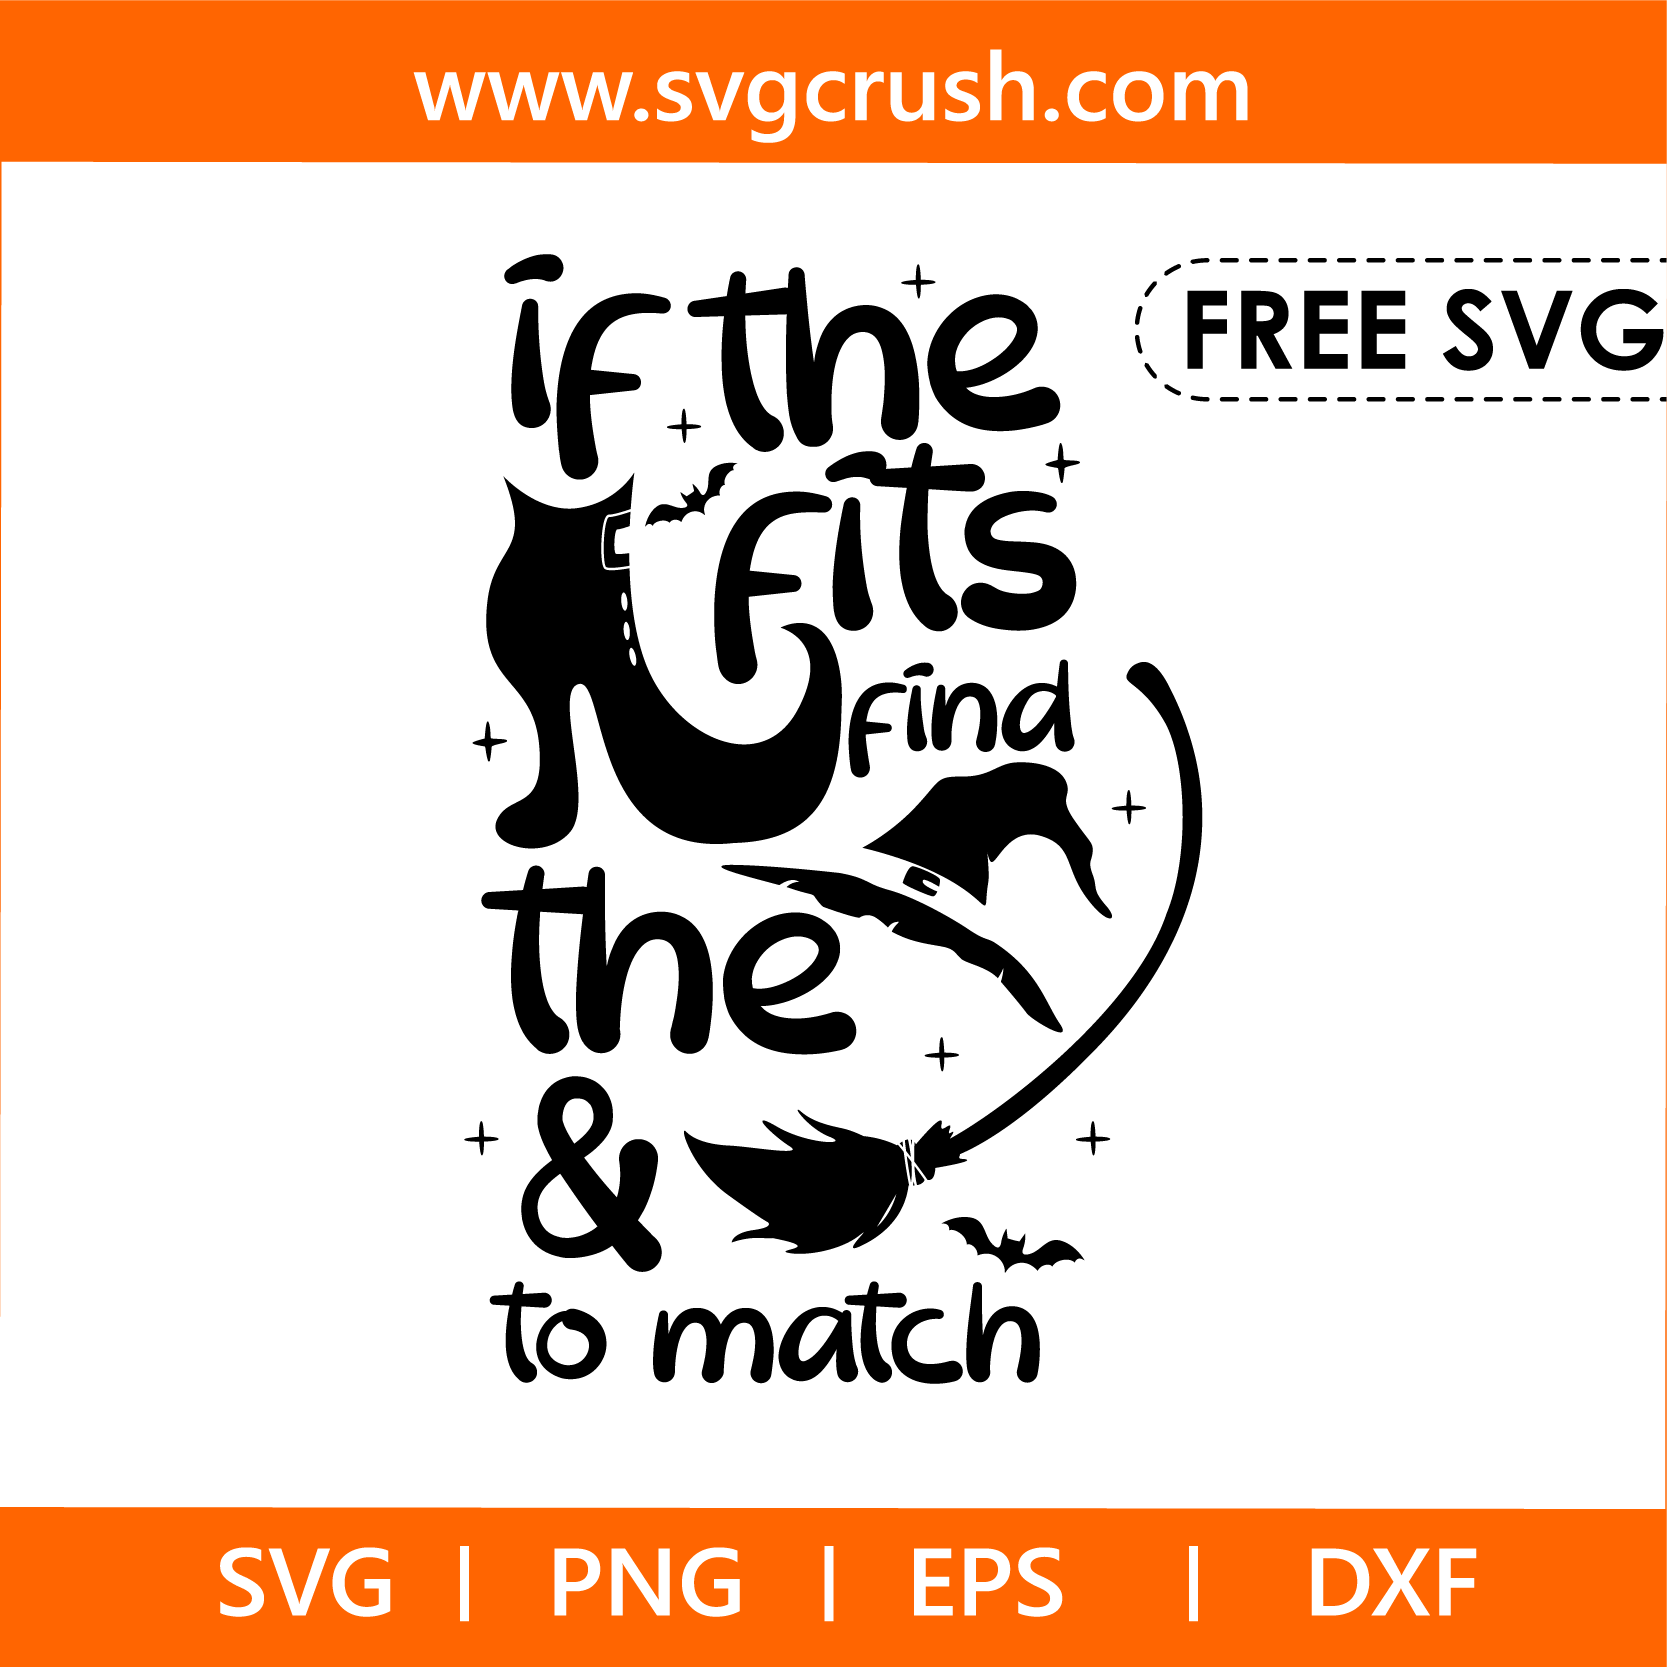 free if-the-shoe-fits-find-the-hat-and-broom-to-match-002 svg